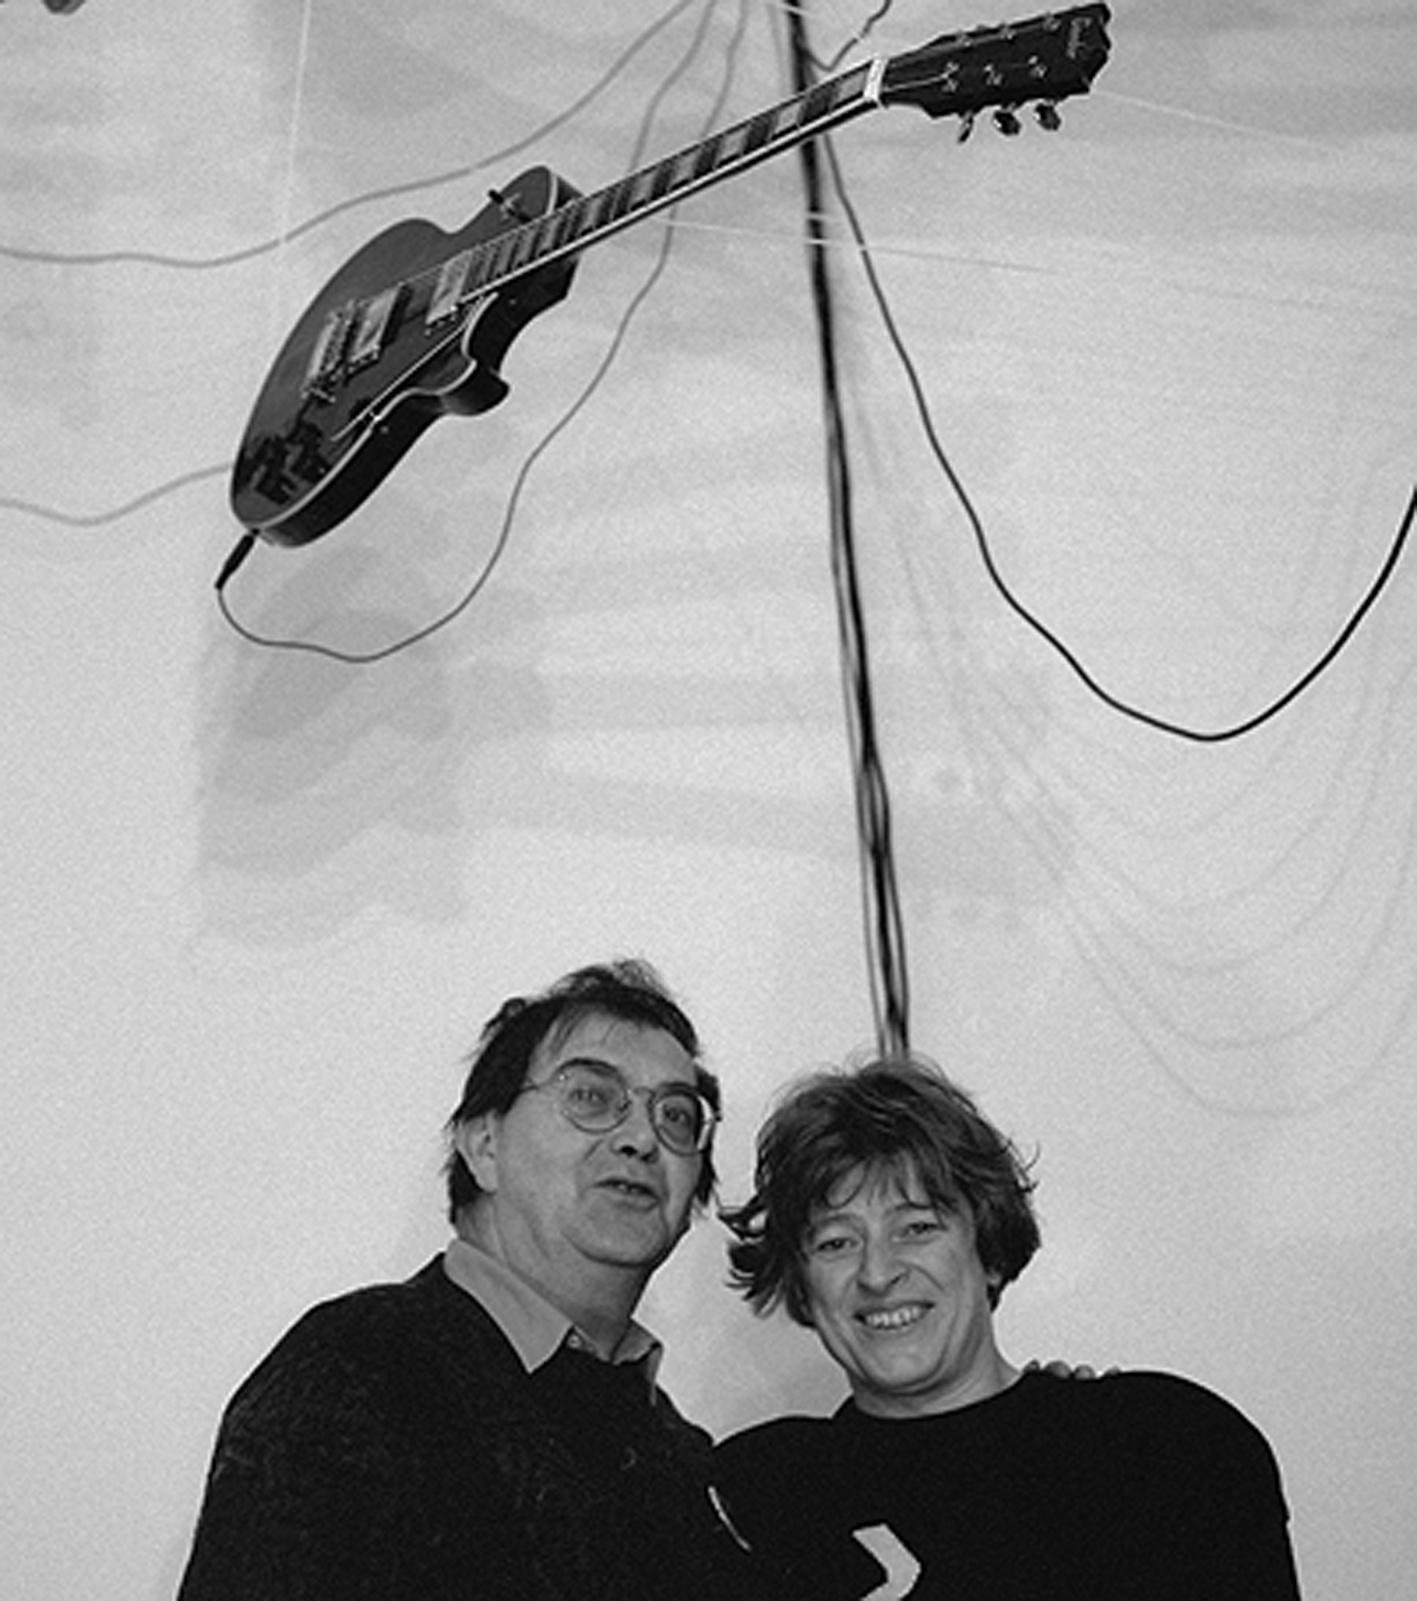 B / W photography. About two people hanging on a electric guitar.